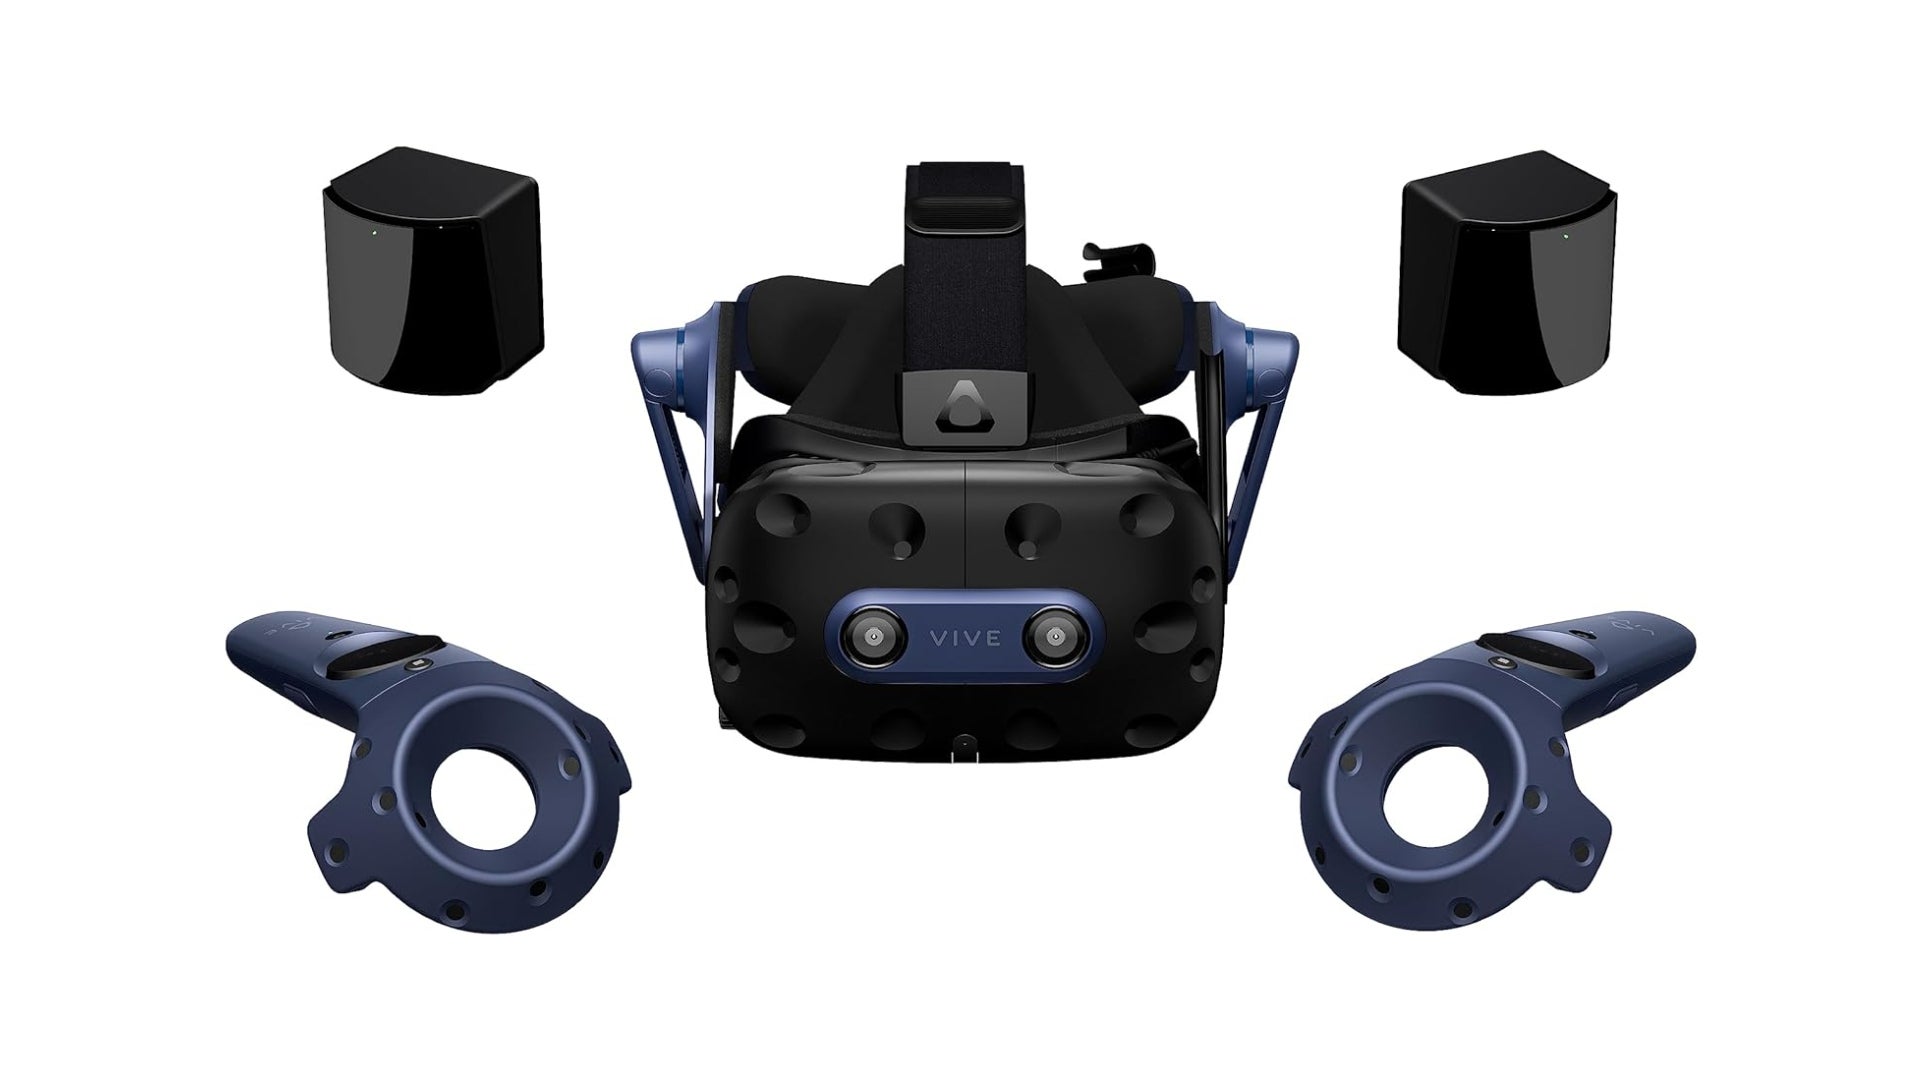 Get the HTC Vive Pro 2 full VR kit for £899 in Amazon's early Black